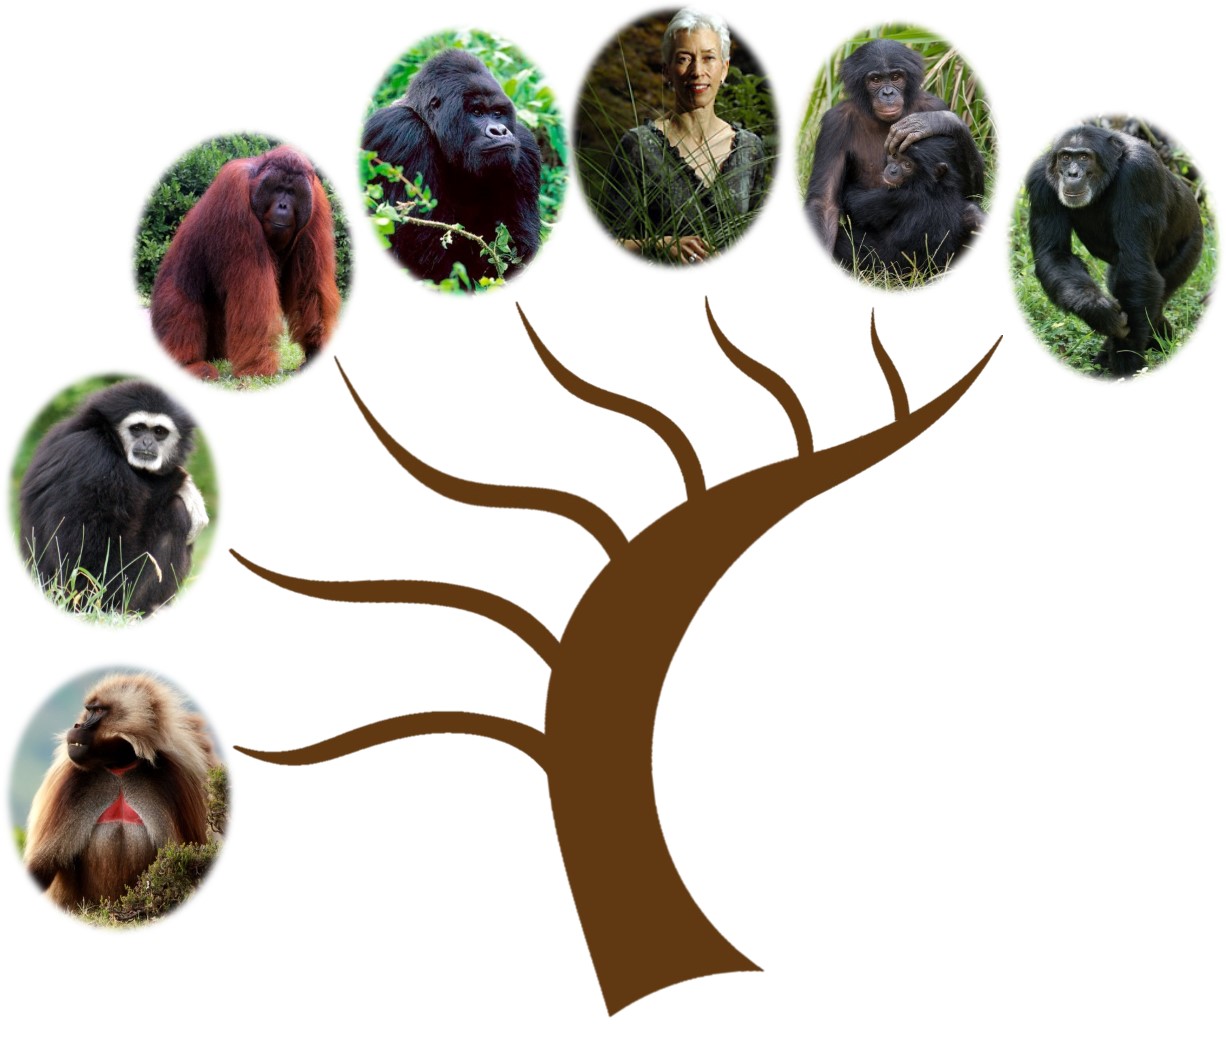 A family tree showing the branching off of primates - baboons, gibbons, orangutans, gorillas, humans, chimpanzees, and bonobos.